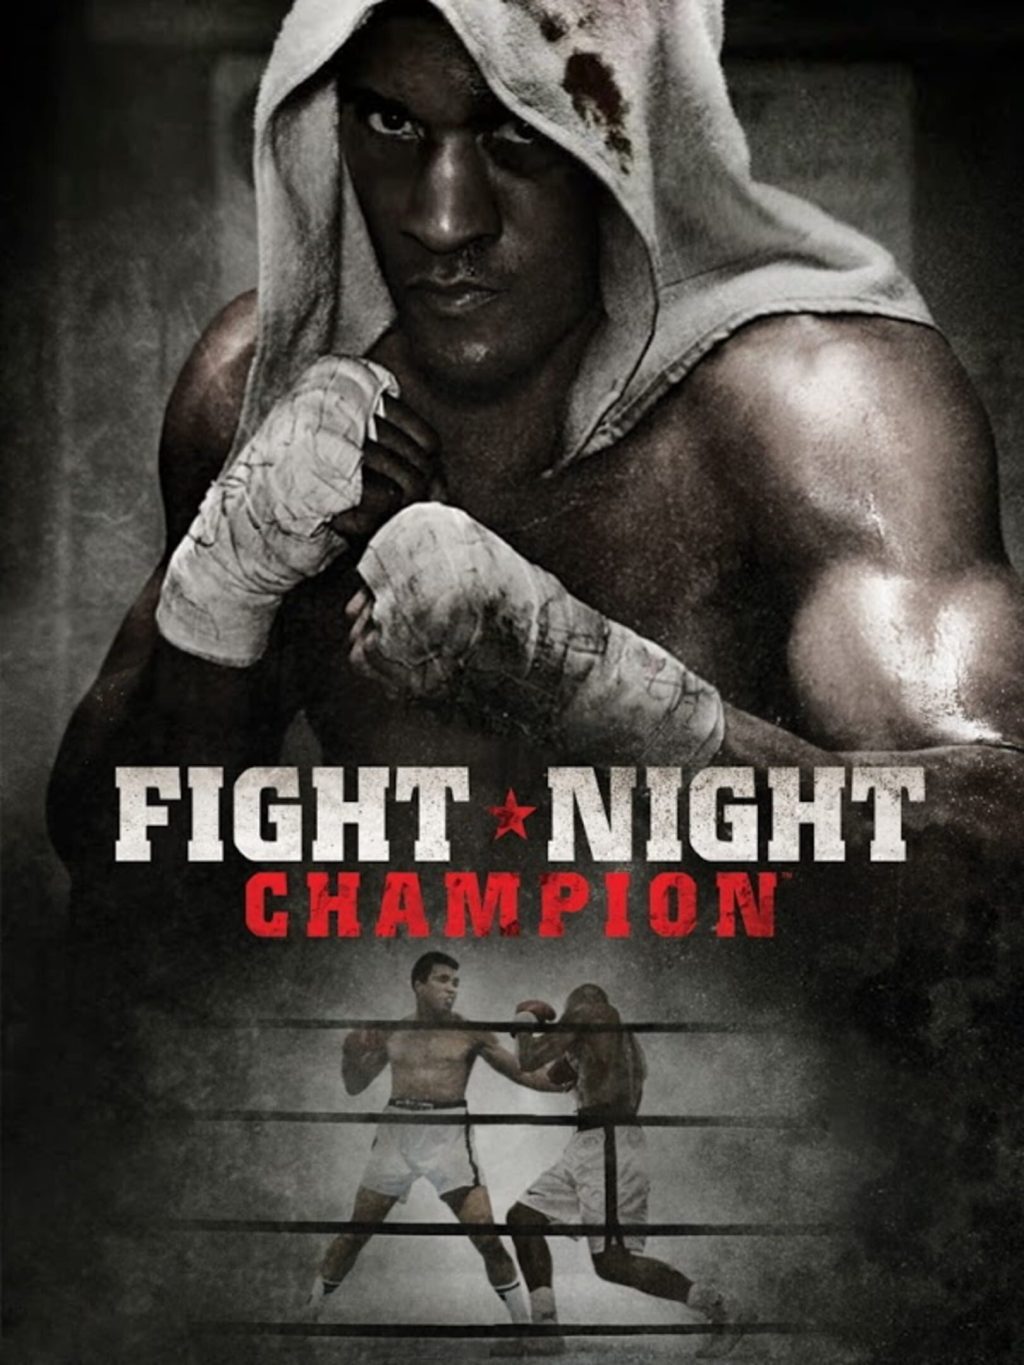 Manifest hypotese Mesterskab Fight Night Champion News, Guides, Walkthrough, Screenshots, and Reviews -  GameRevolution